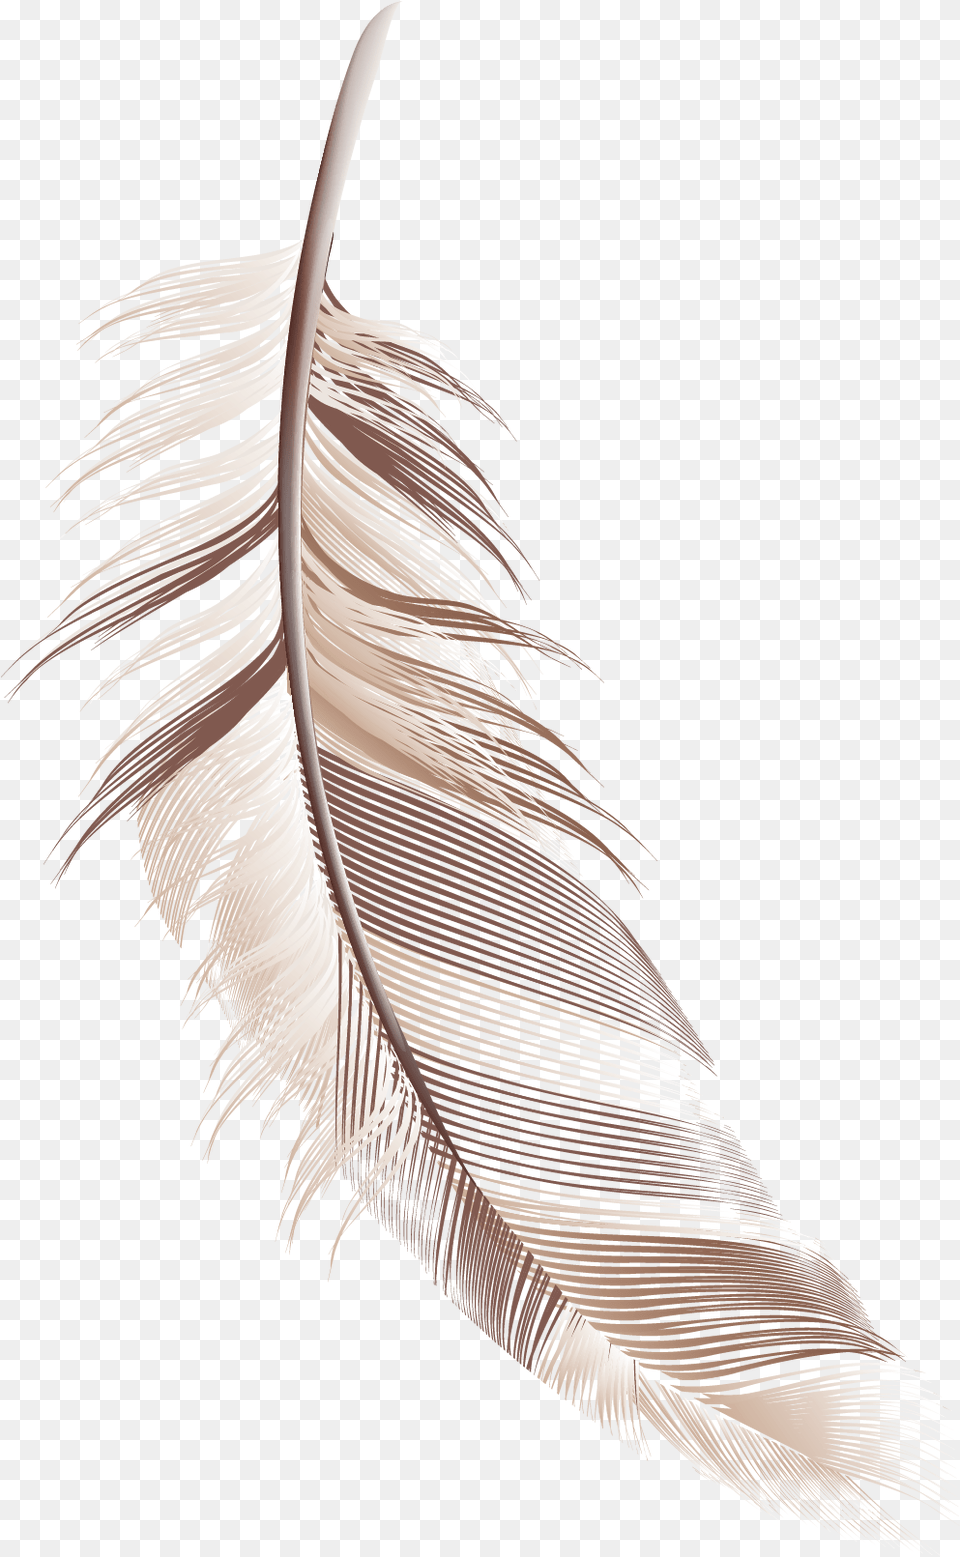 Cartoon Feather Material Transparent Background Feather Cartoon, Accessories, Bottle, Art, Adult Png